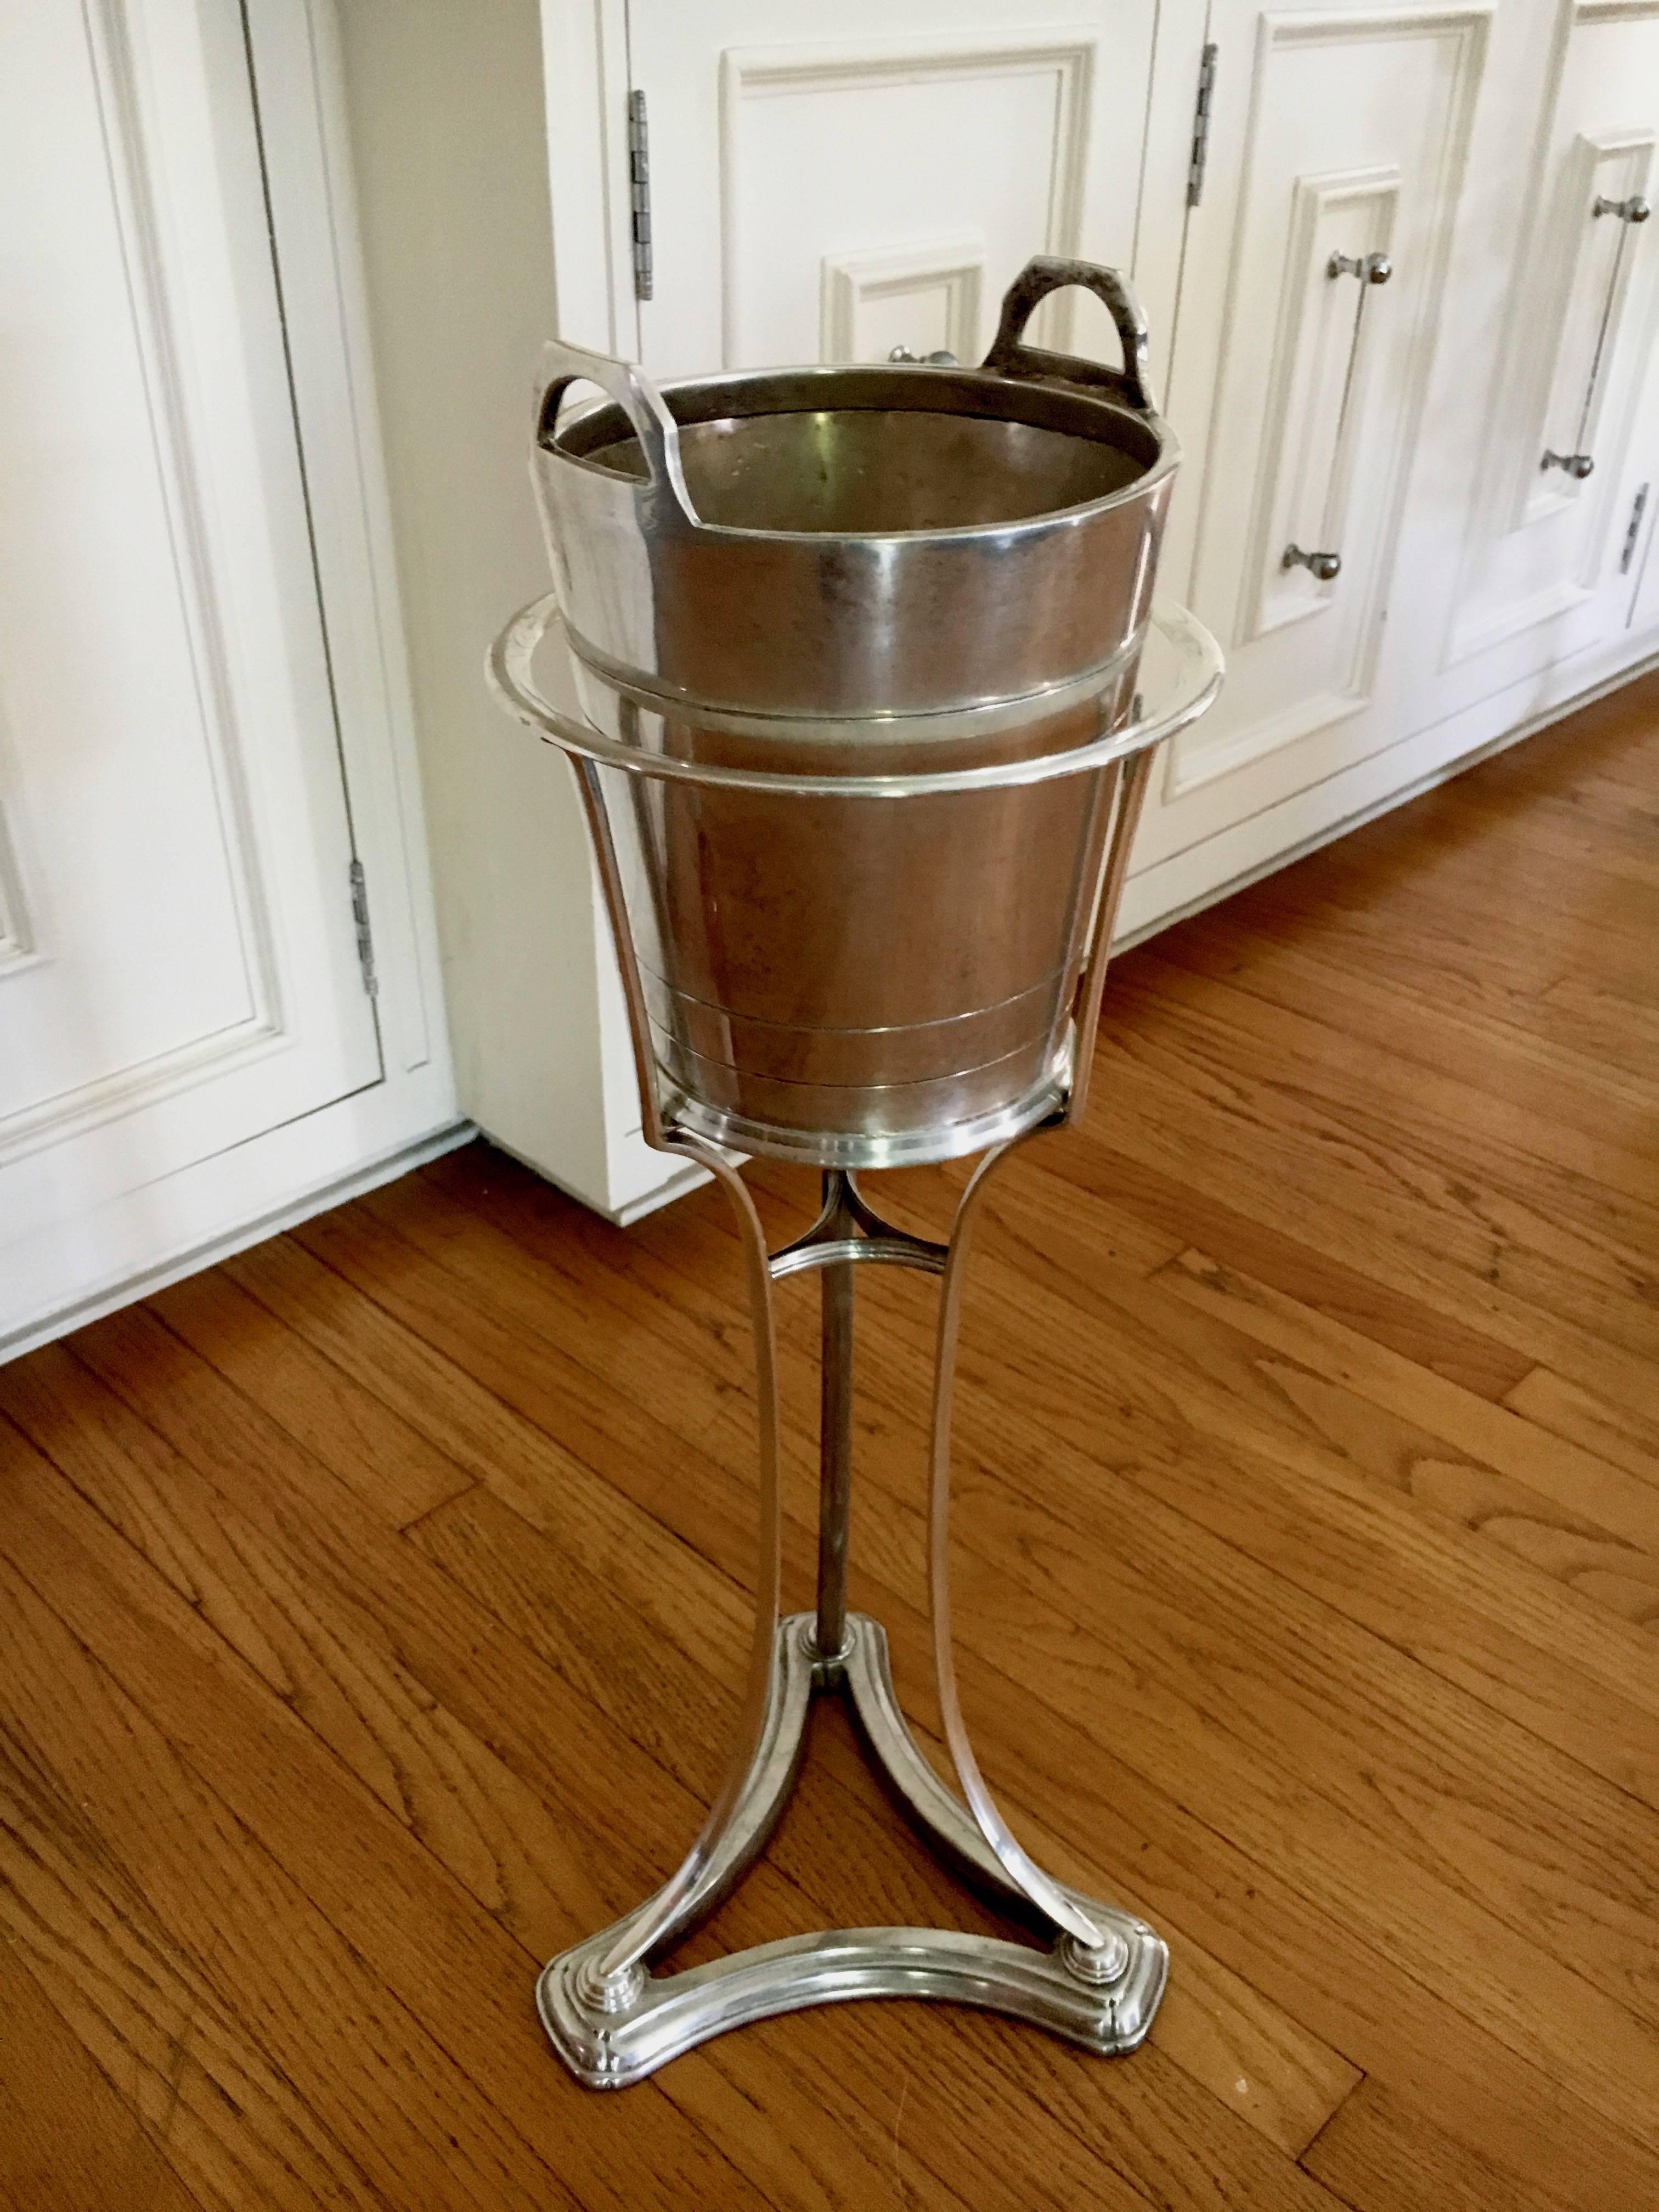 Silver plate Champagne wine bucket in stand - this ice is a very nicely made and high quality piece - ready for your next party or event.

The size is such that it would work well in any setting, table side, bed side, in the office or your next